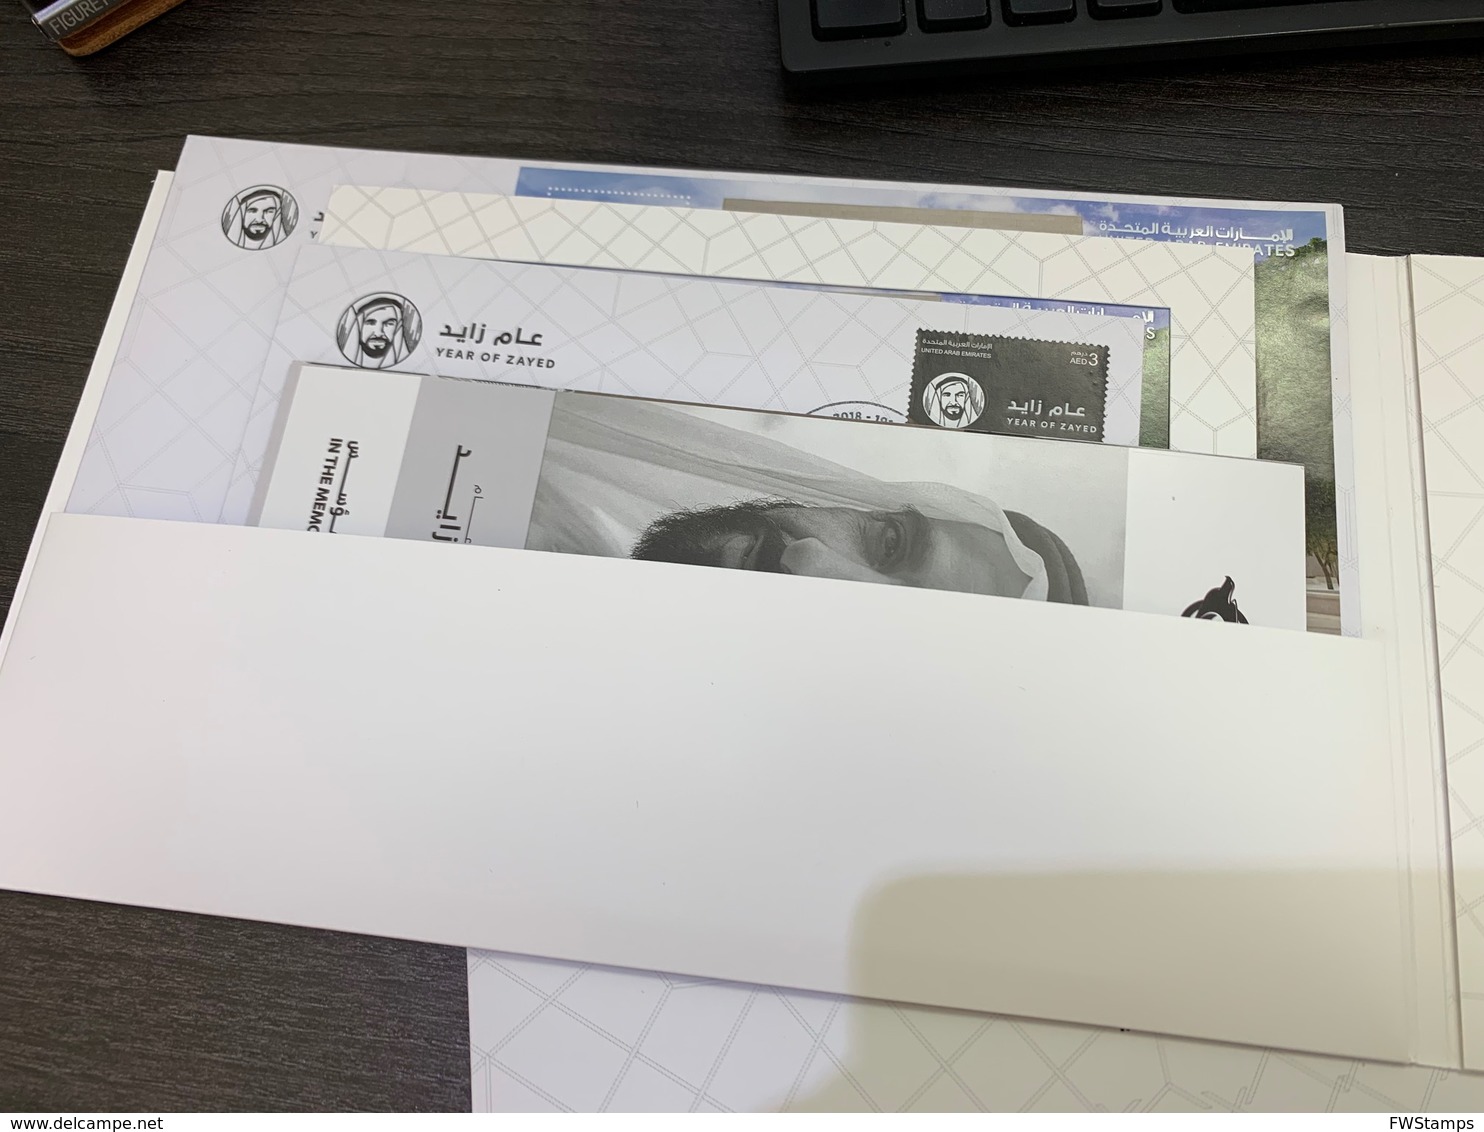 UAE 2019 VIP Folder 100 Years Of Sheikh Zayed Stamps, FDC, Maximum Cards LTD 100 Only - Emirats Arabes Unis (Général)